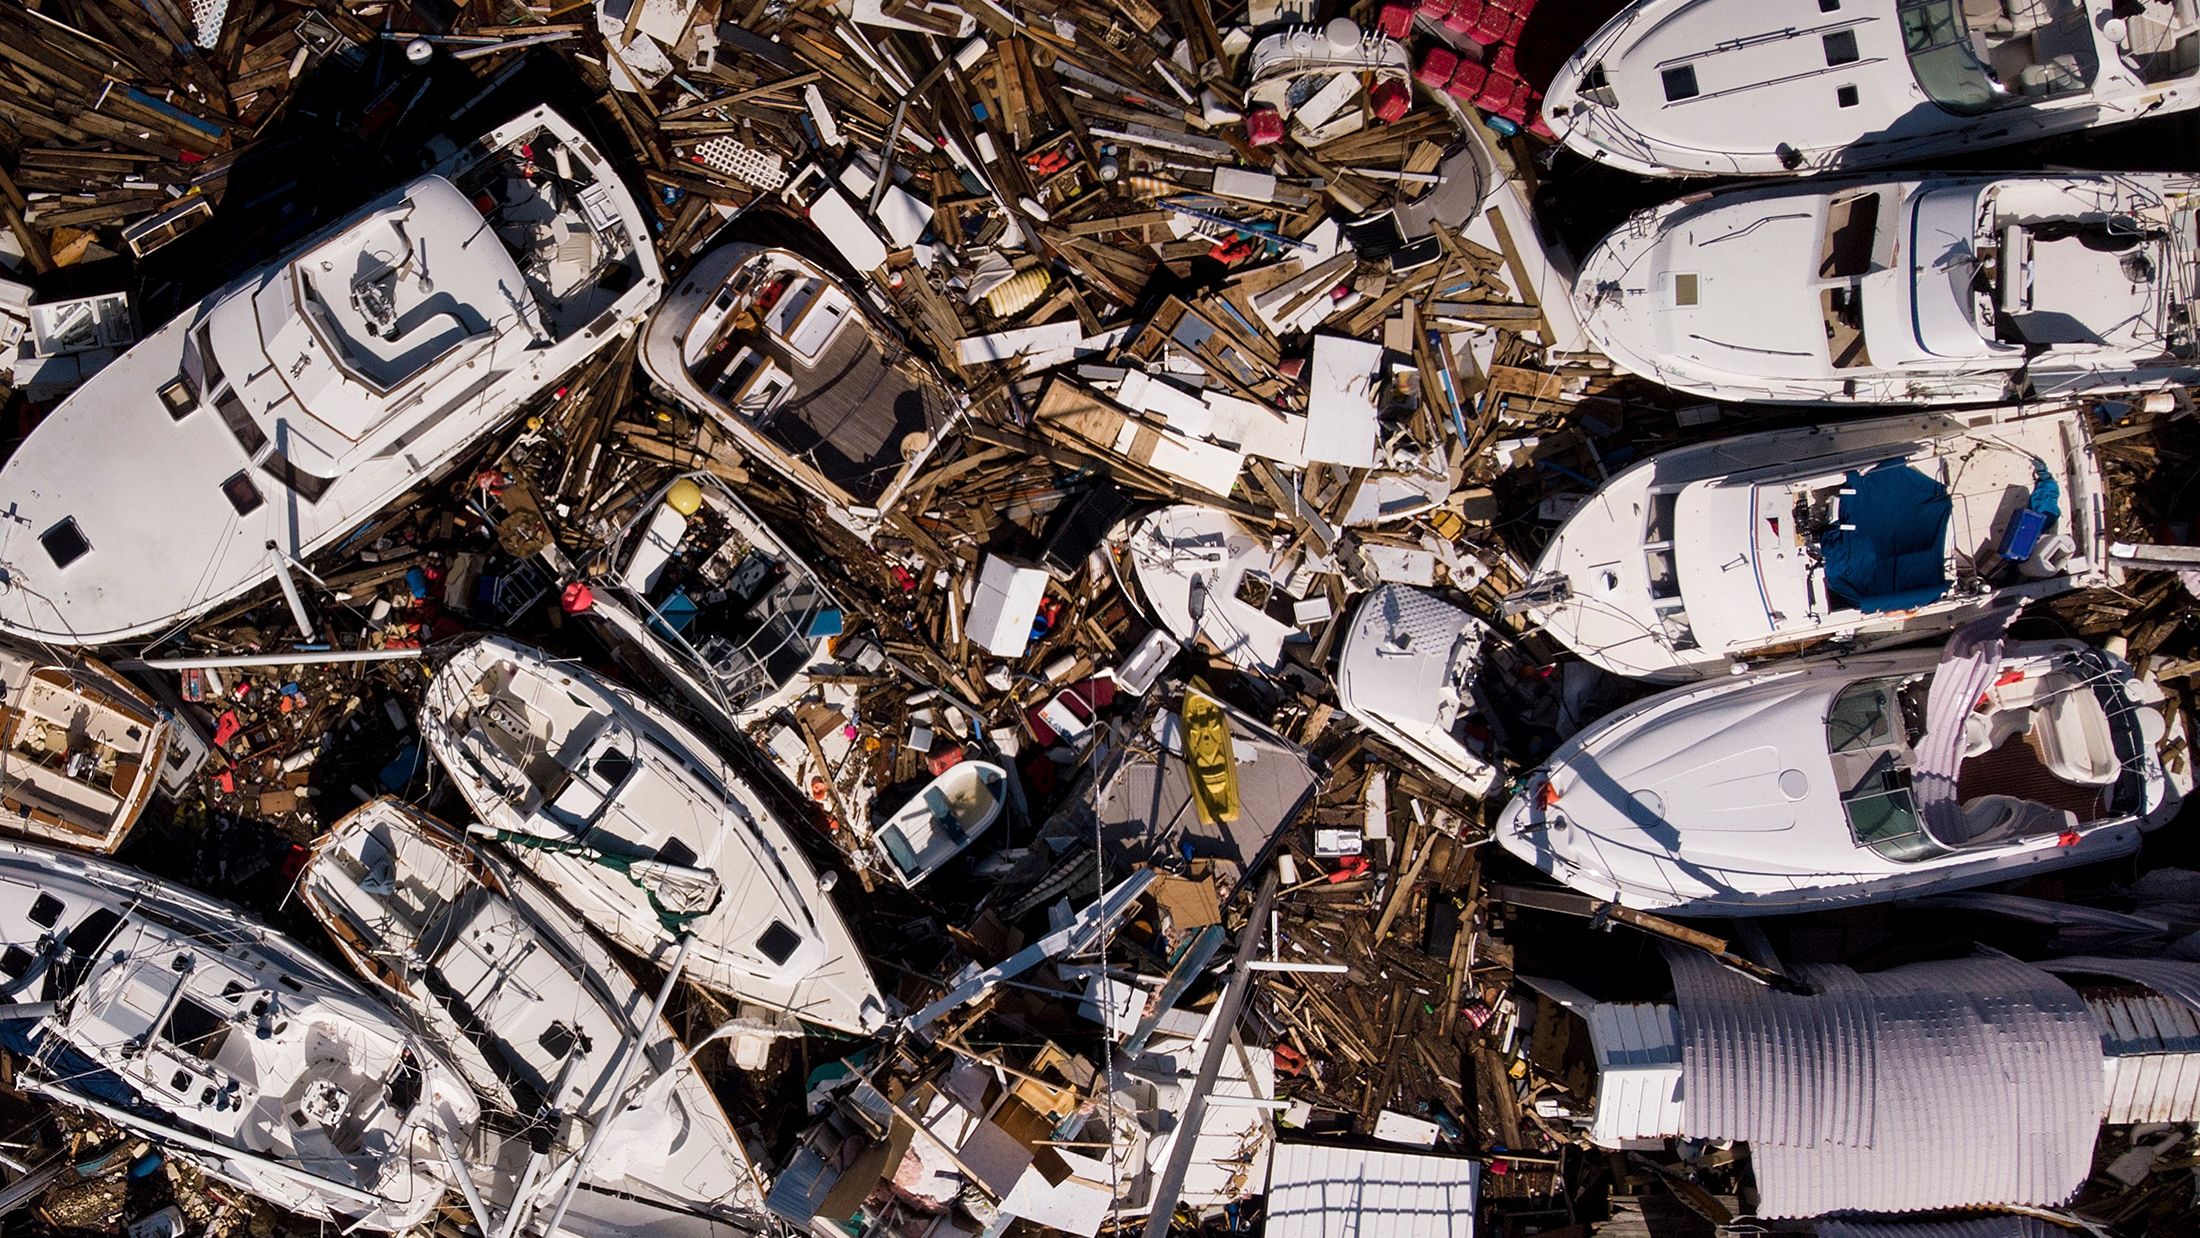 Storm-damaged boats are piled up in Panama City on October 11.